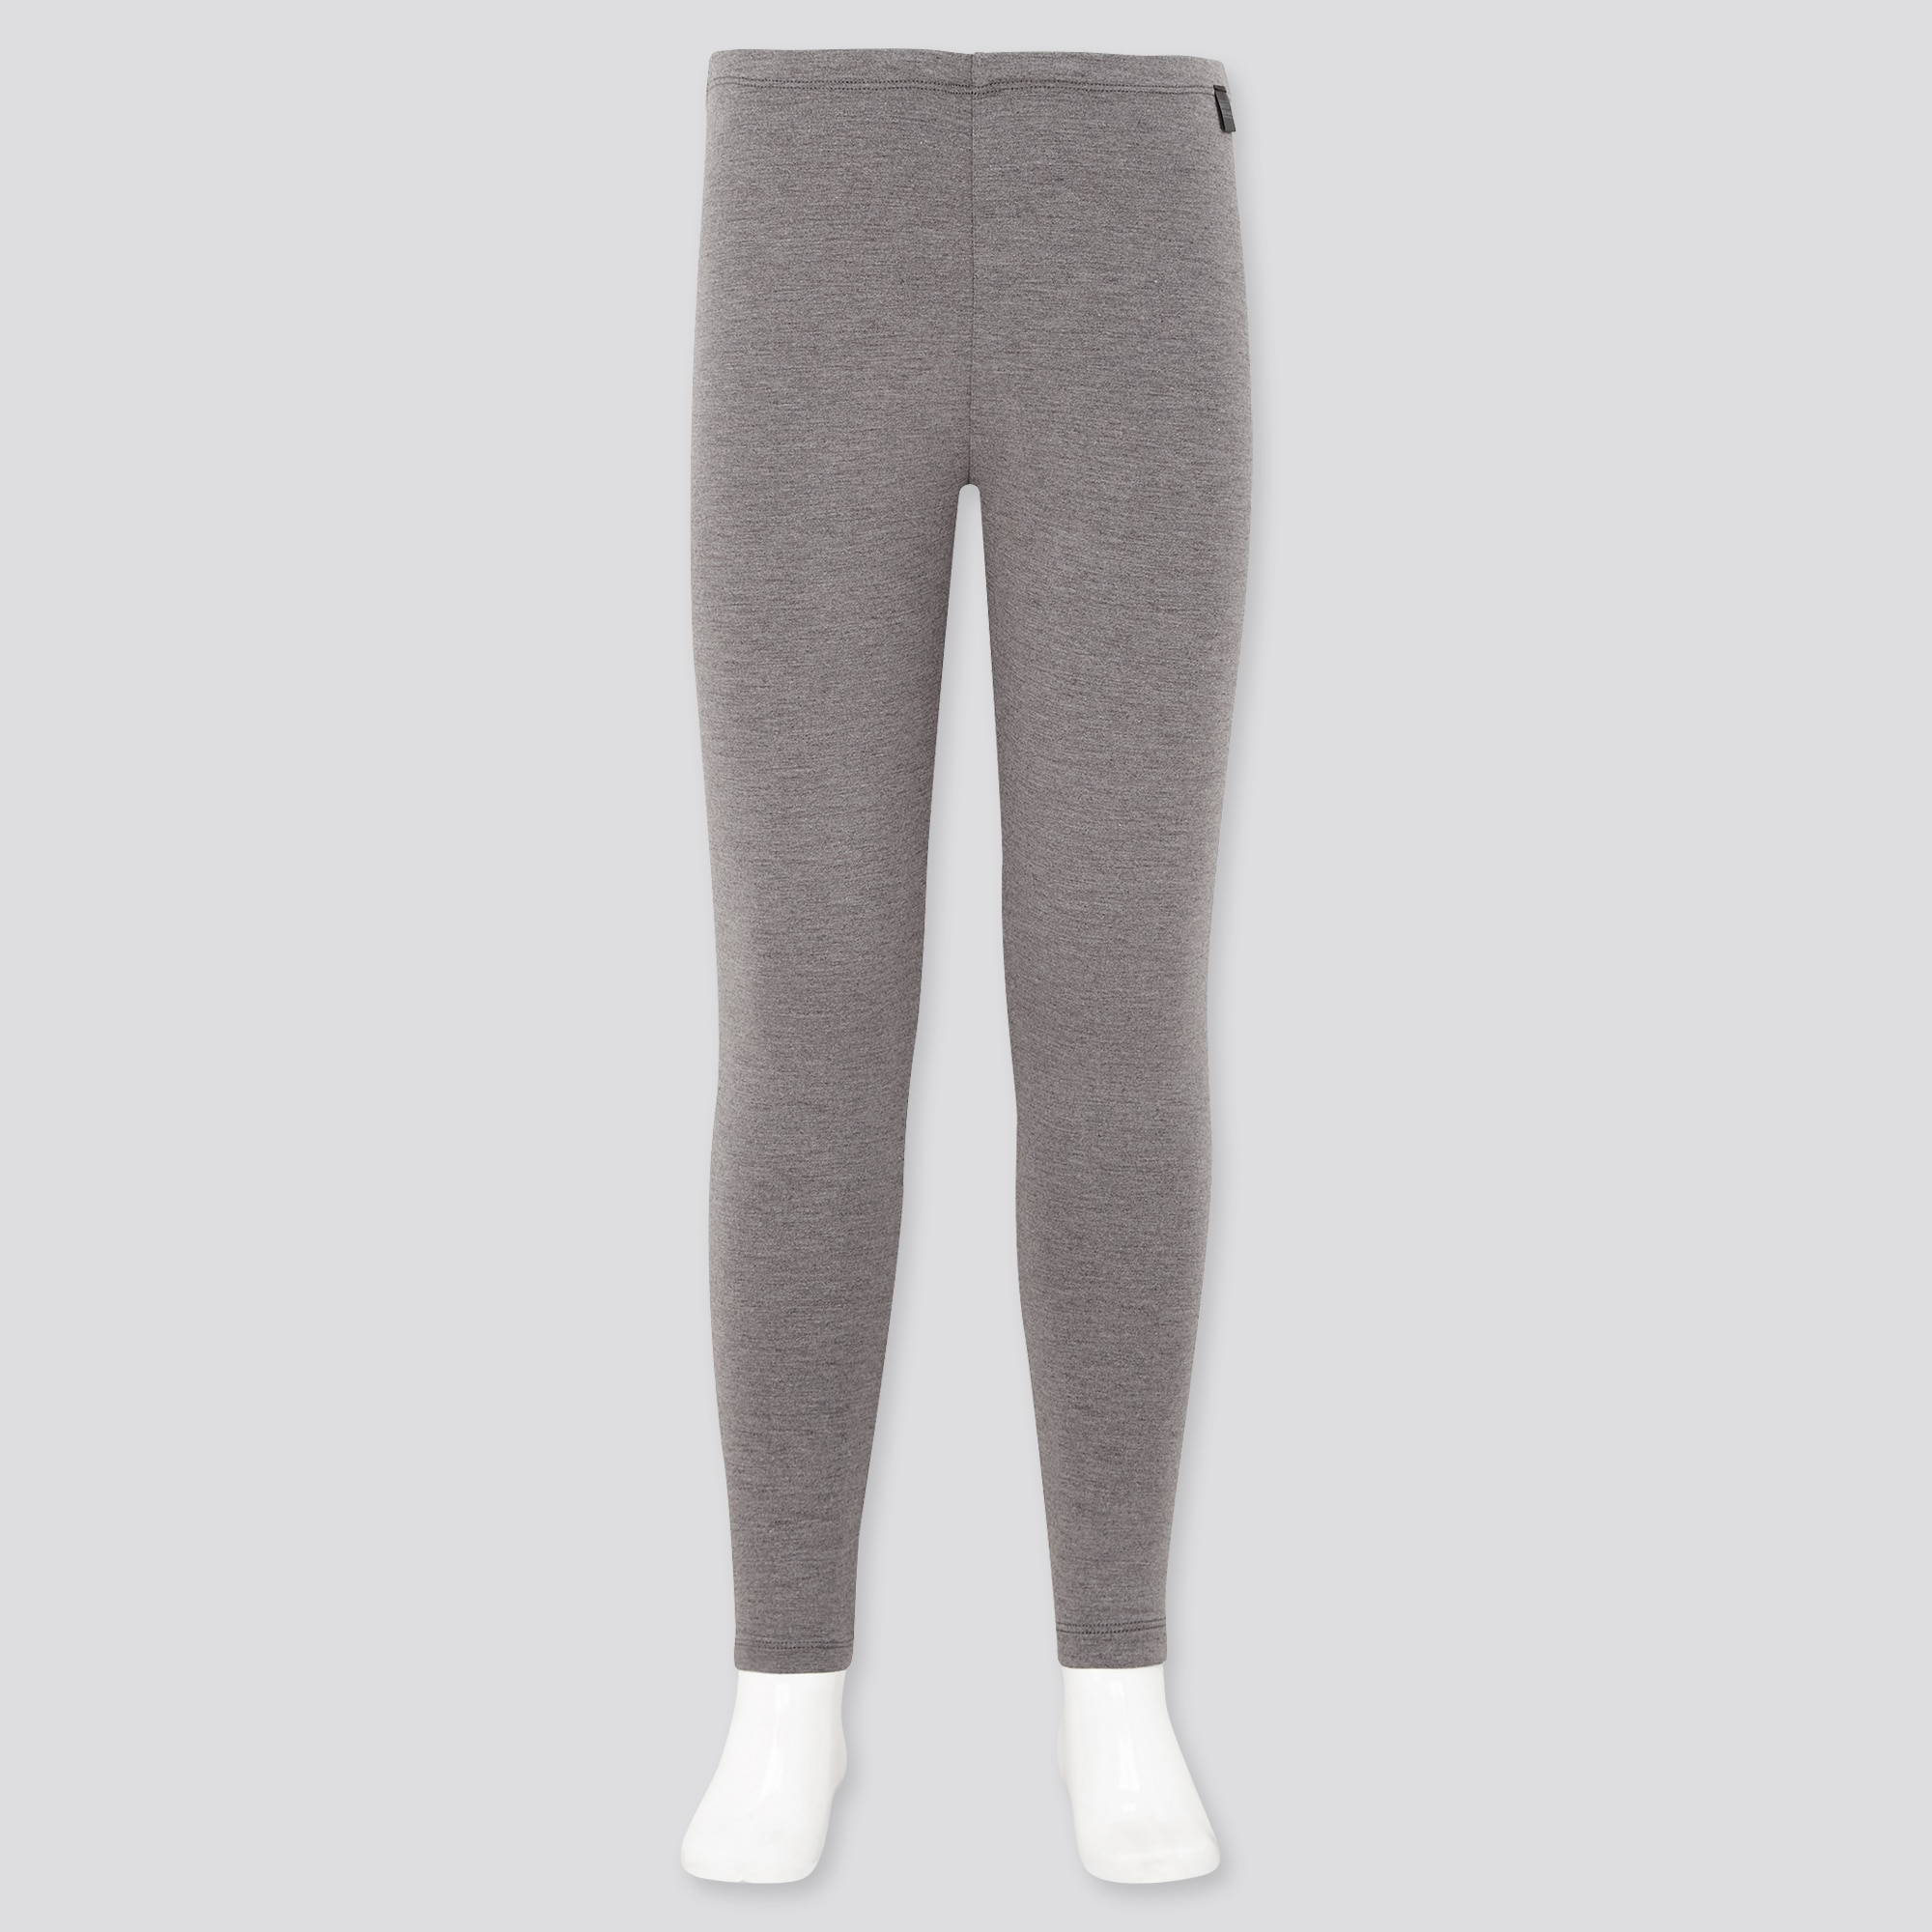 Ultra Stretch Leggings Pants Uniqlo Sale  International Society of  Precision Agriculture